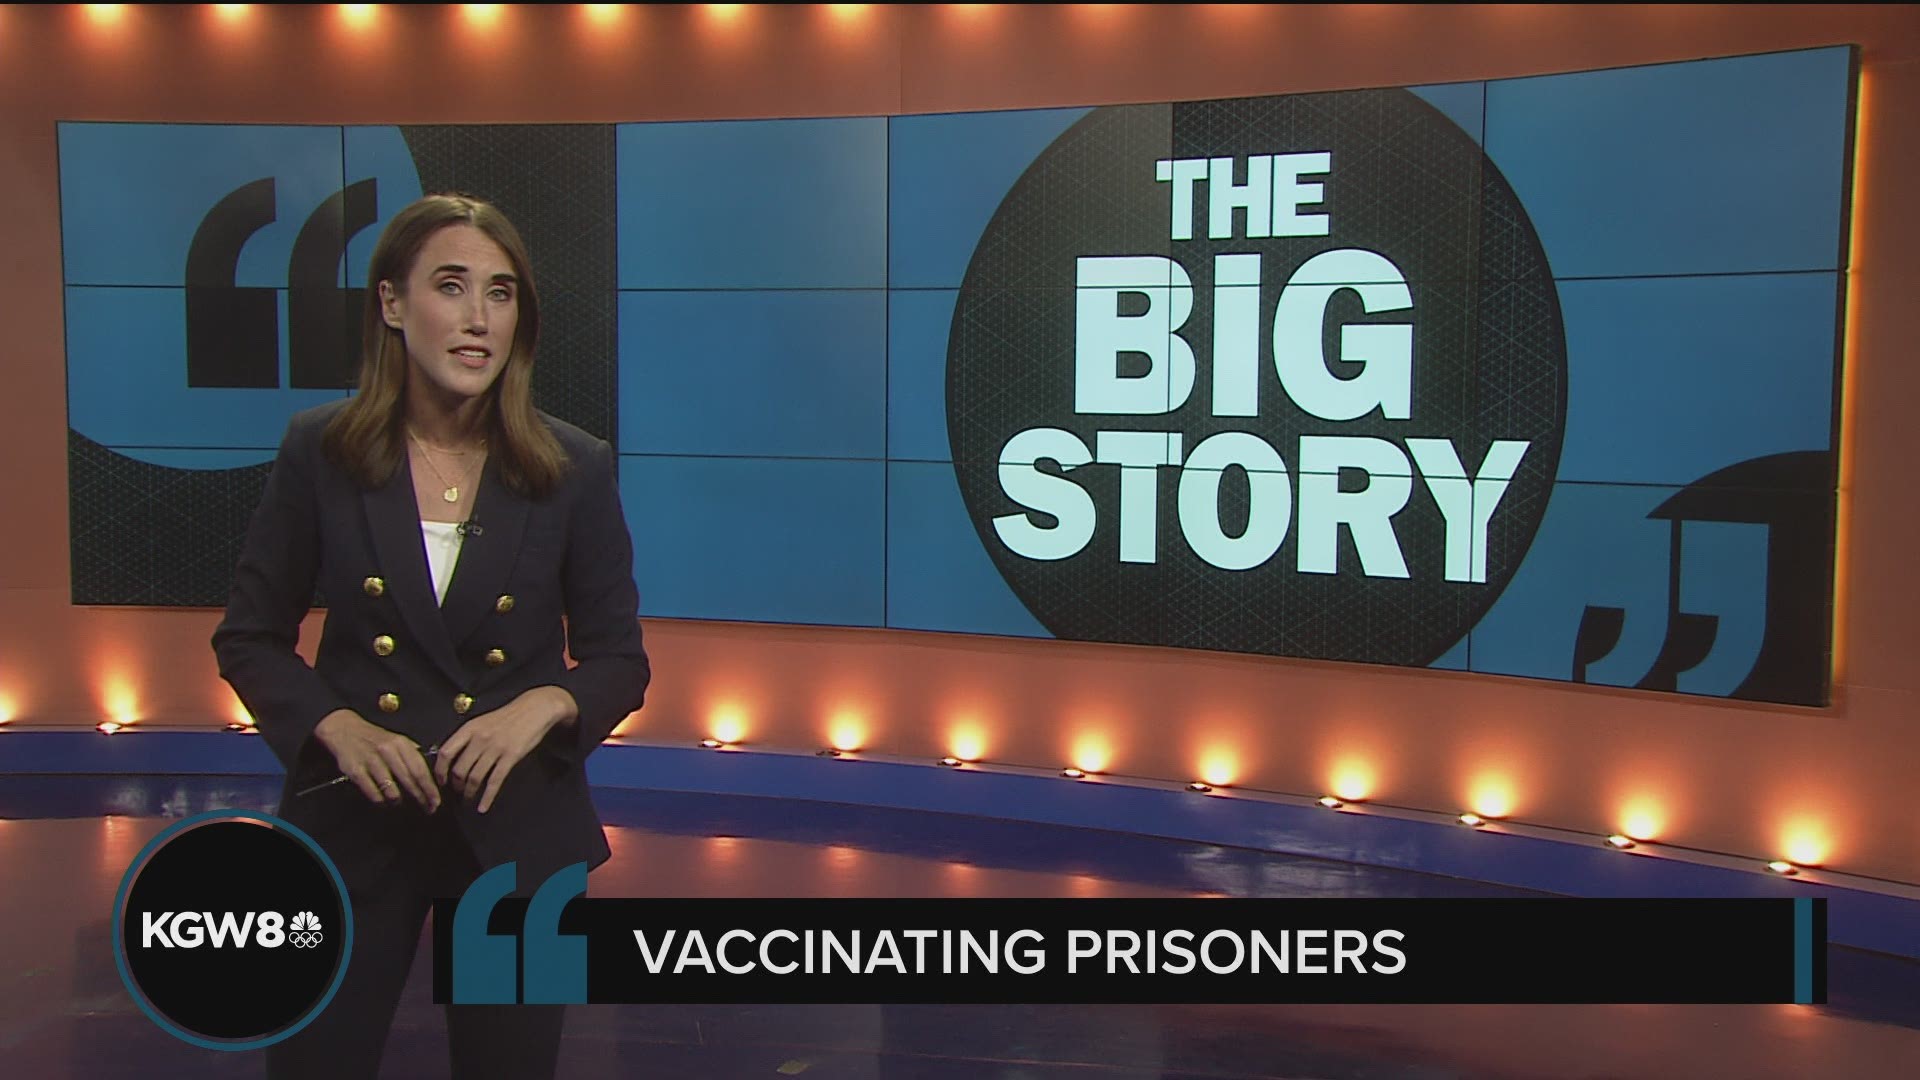 Oregon prisons were once home to some of the worst workplace COVID-19 outbreaks last year. Now, they have a vaccination rate of 70%. So how'd we get here?